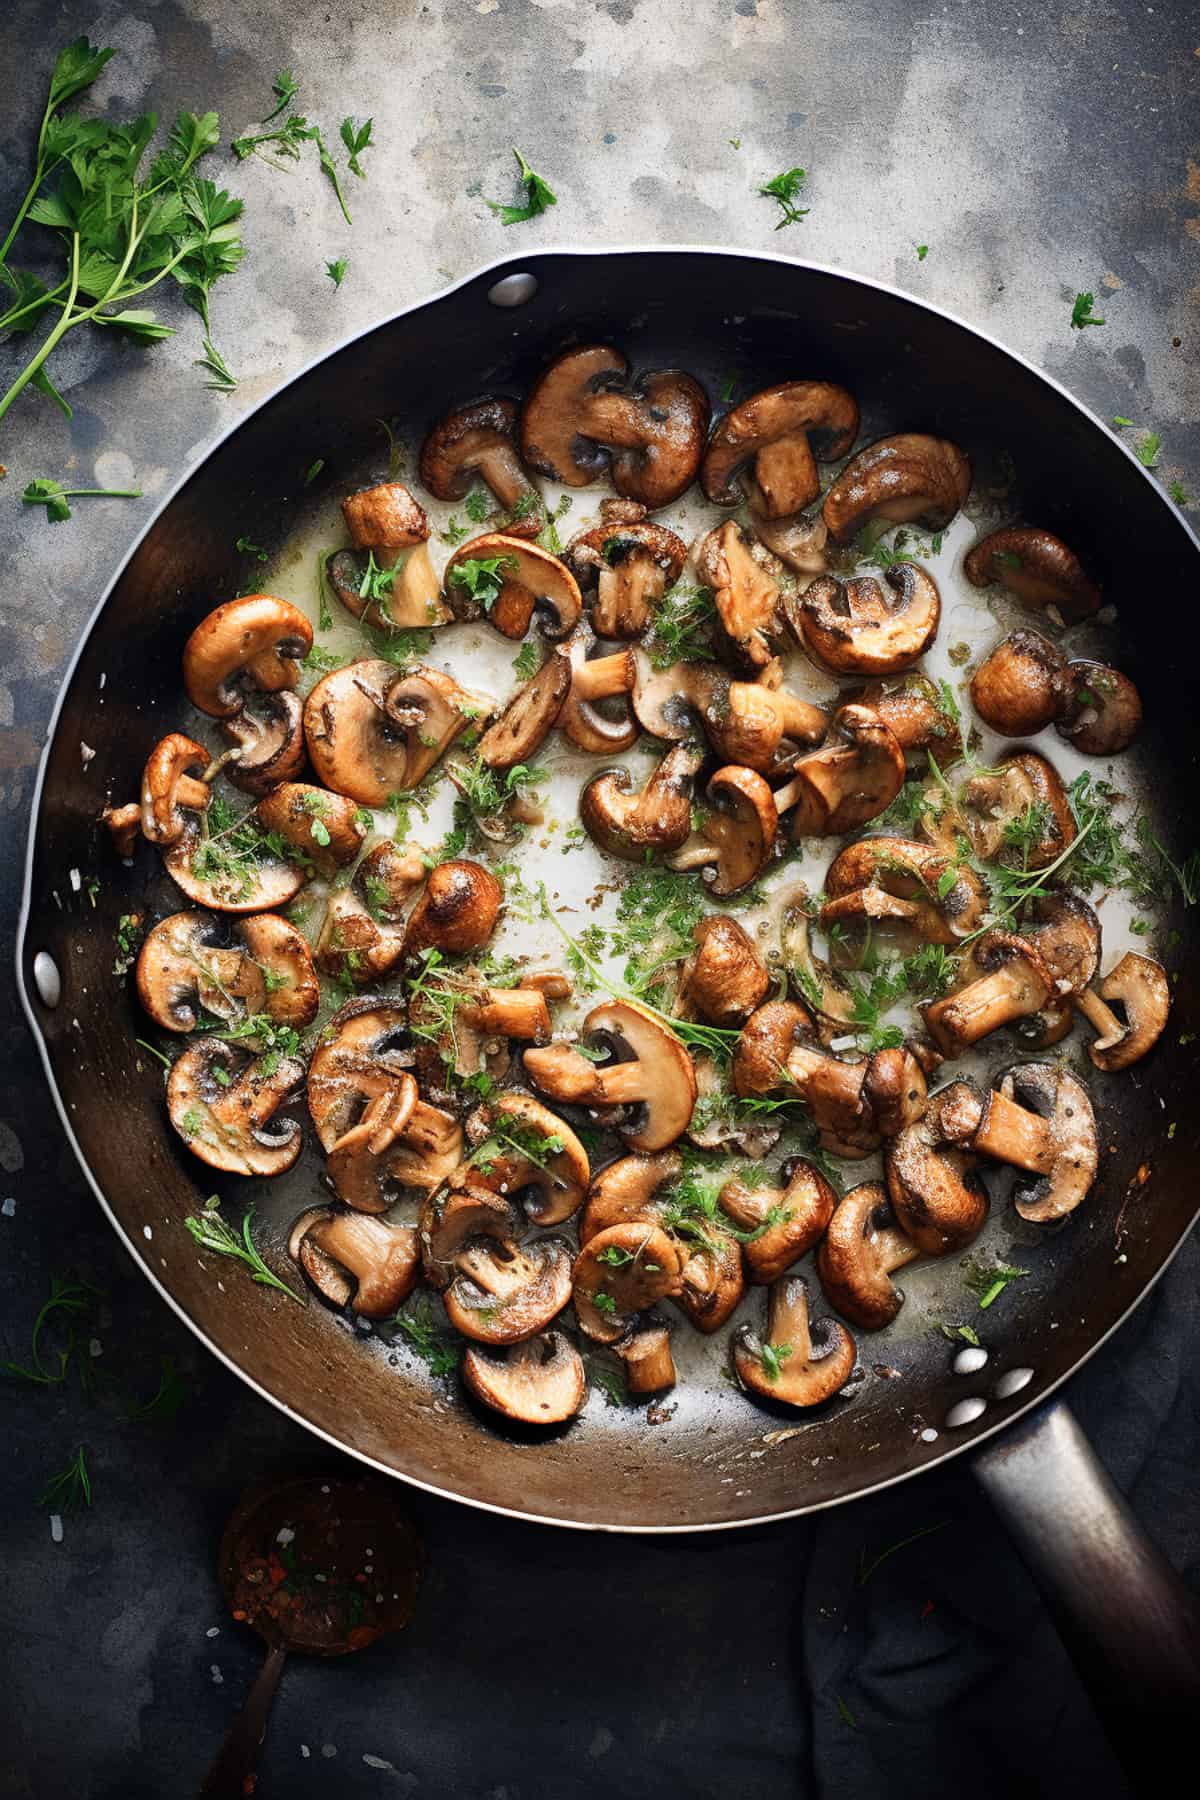 Mushrooms for Rich beef stroganoff in a skillet.